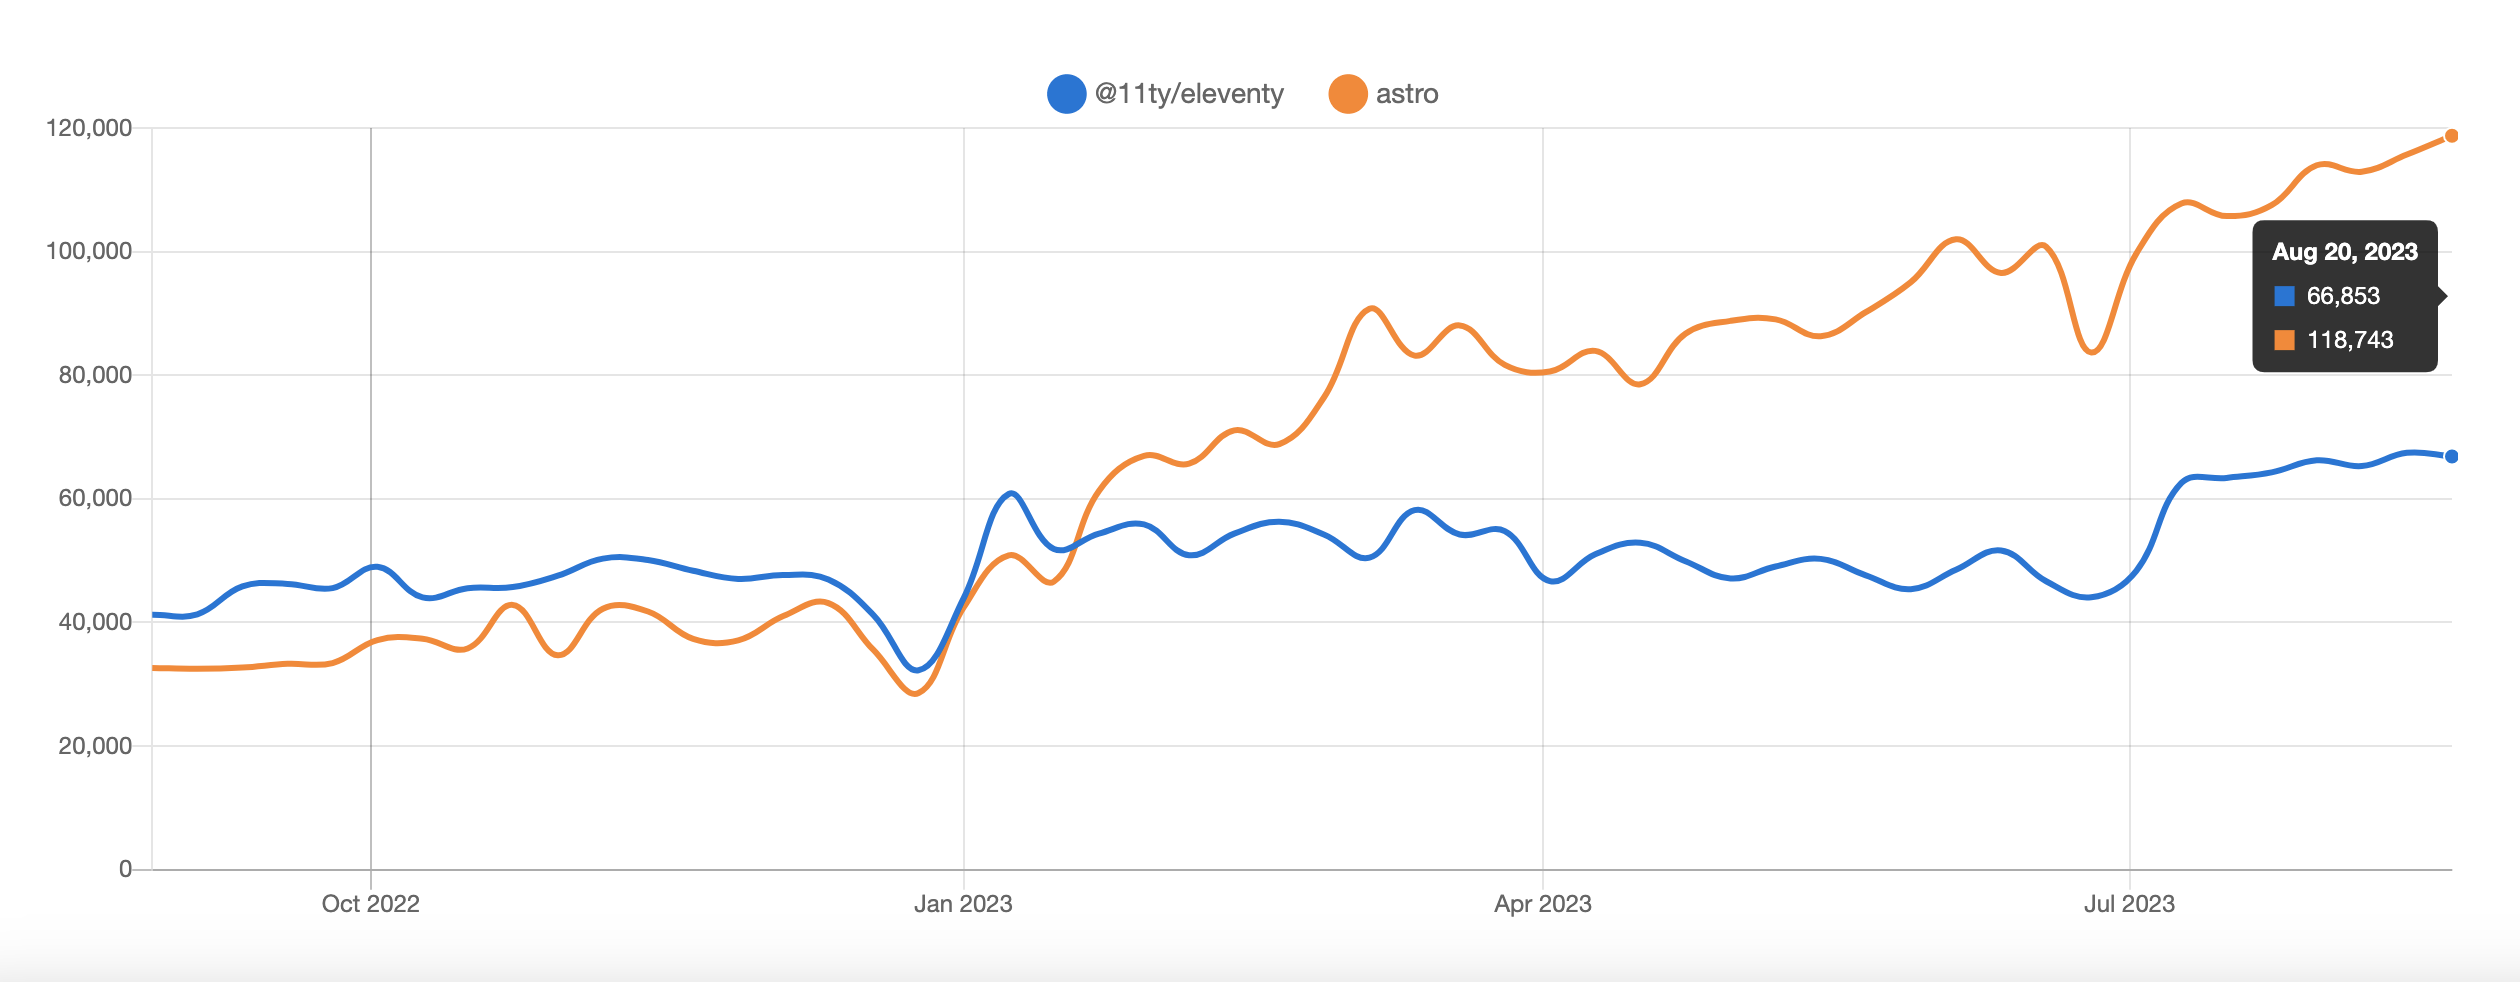 npm downloads over time for Astro and Eleventy (11ty) static site generators